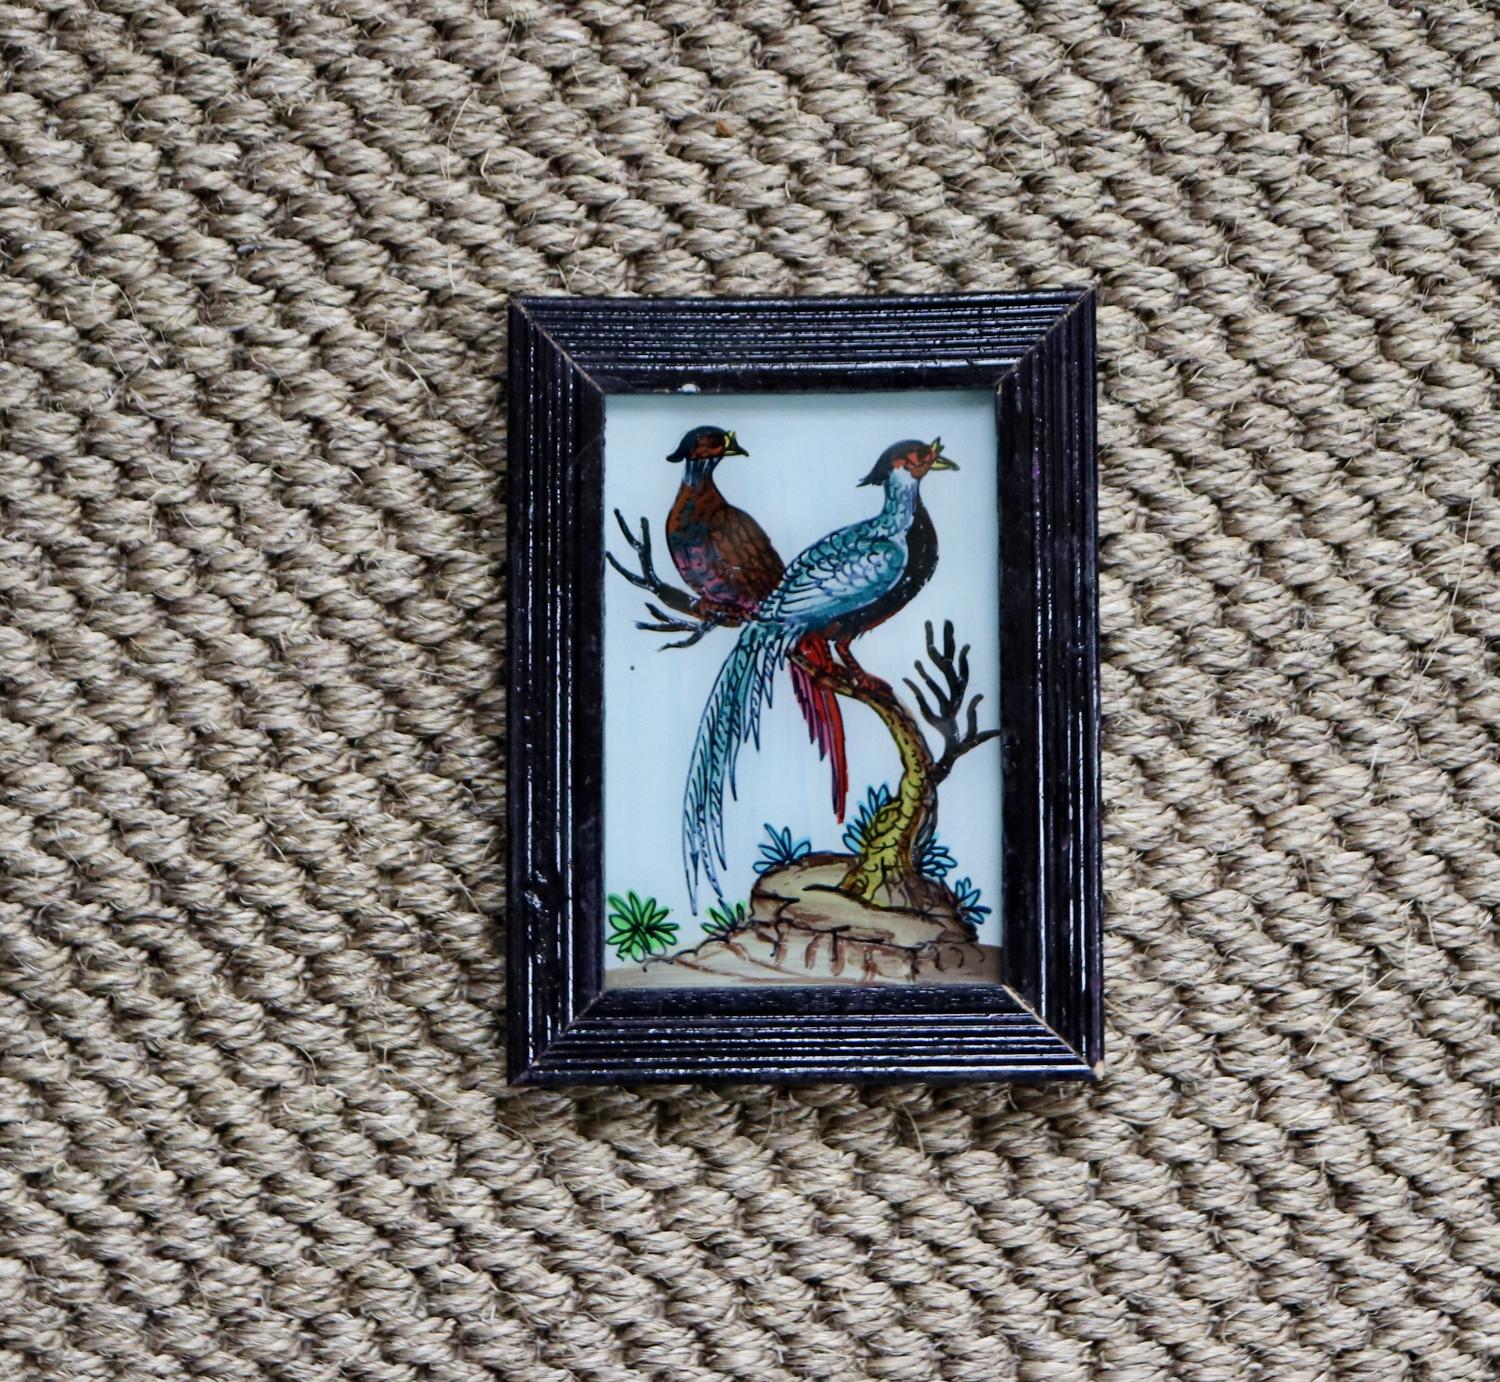 Reverse glass painted Indian pictures of bird and flowers